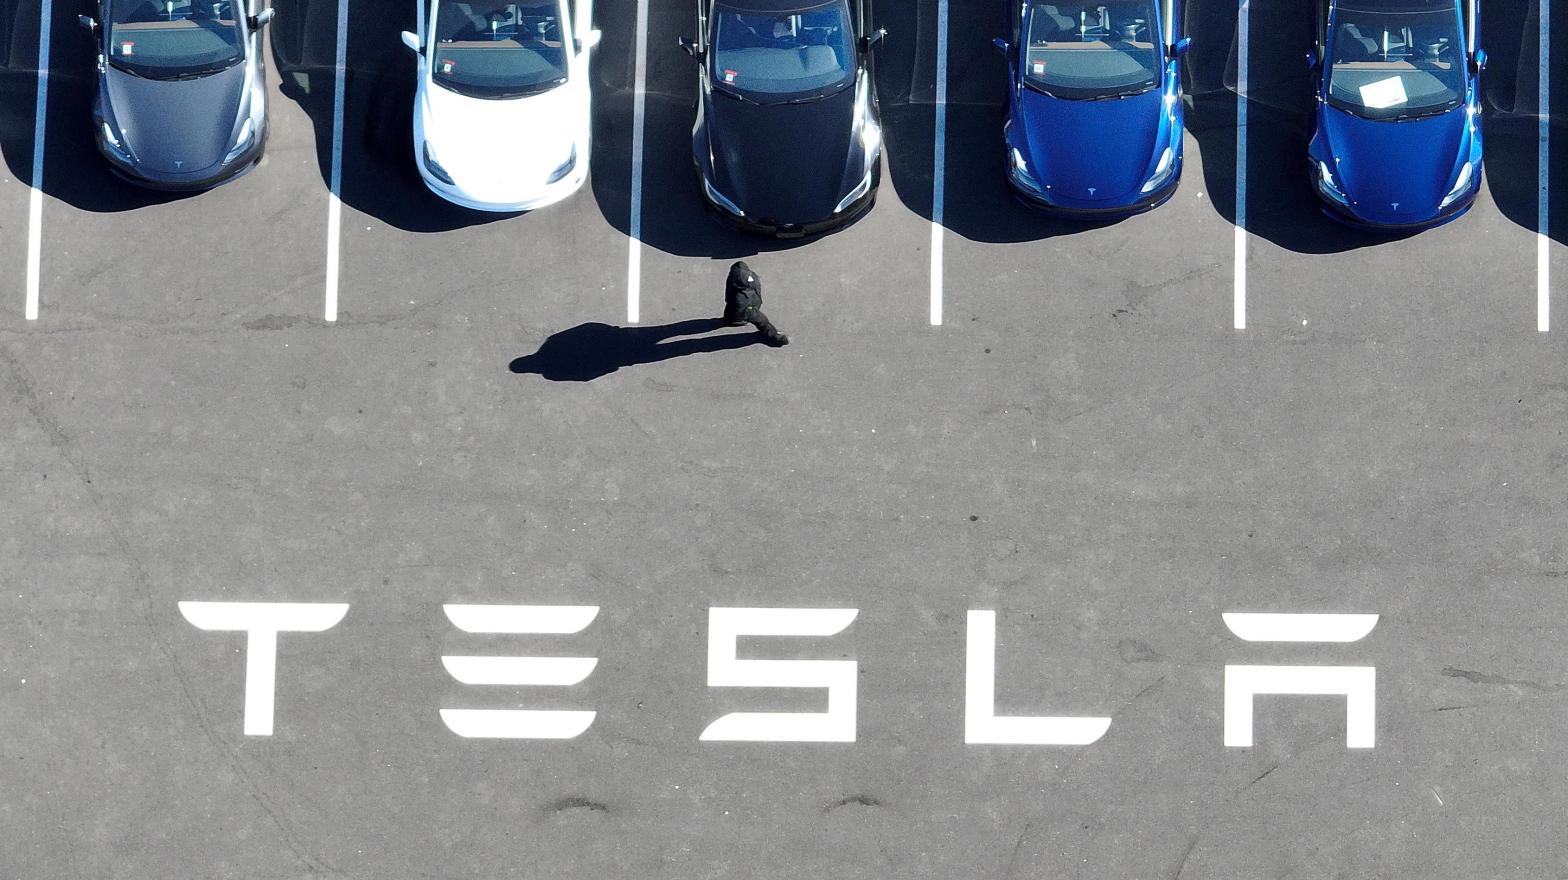 Tesla just can't catch a break from bad news. (Photo: Justin Sullivan, Getty Images)